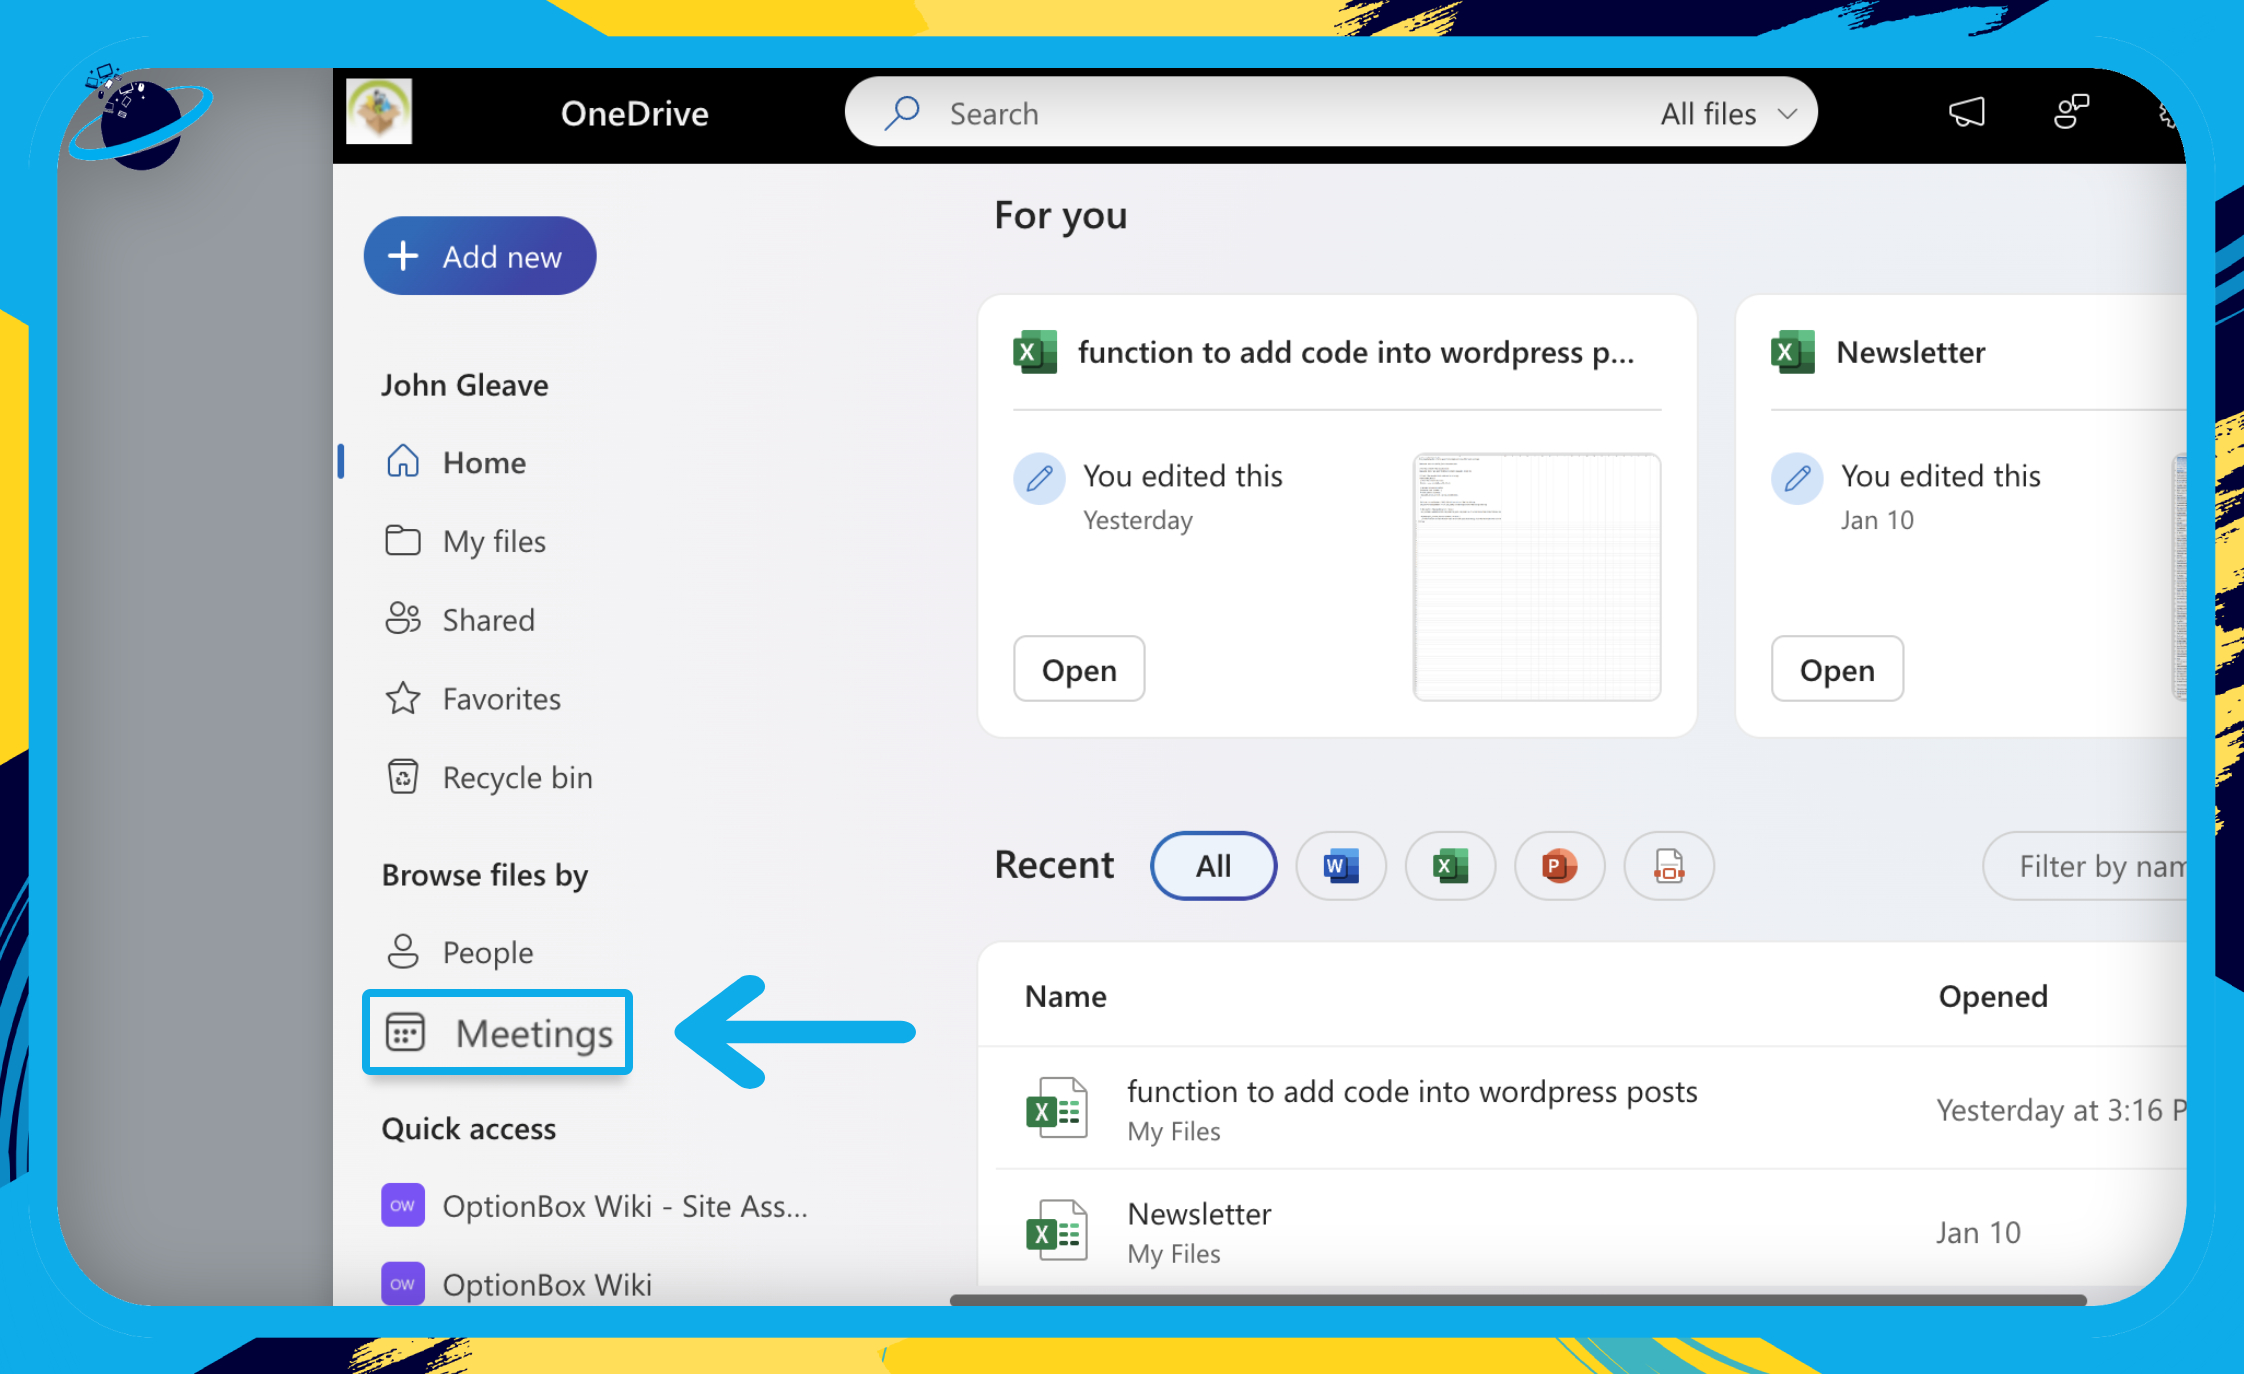 Click "Meetings" in the left menu to view files shared during meetings.